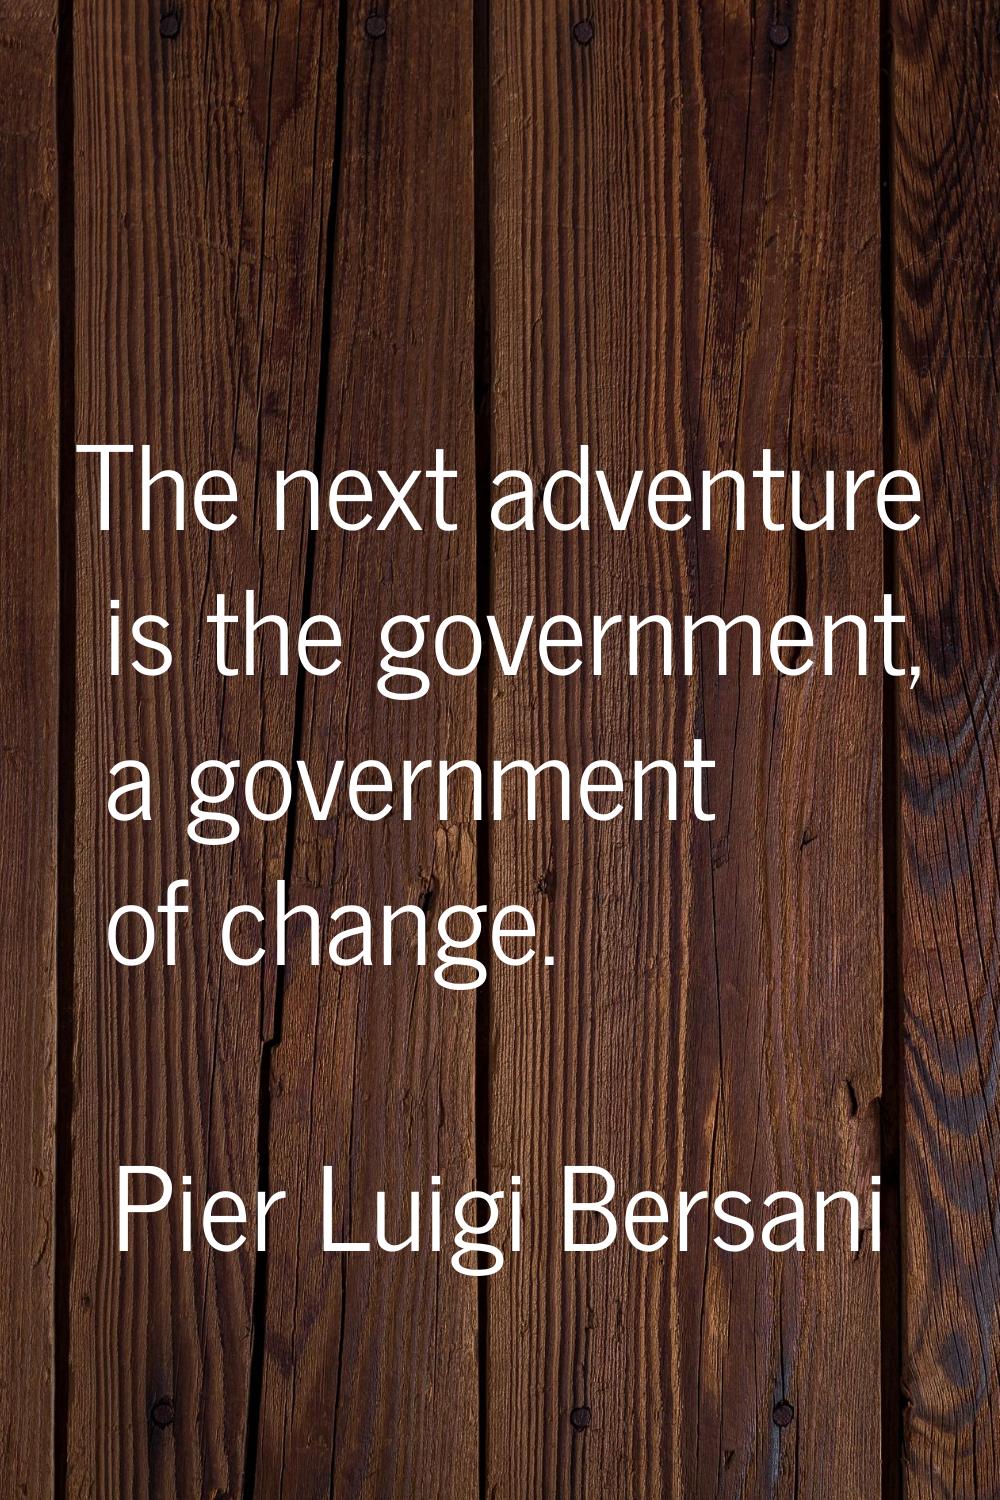 The next adventure is the government, a government of change.